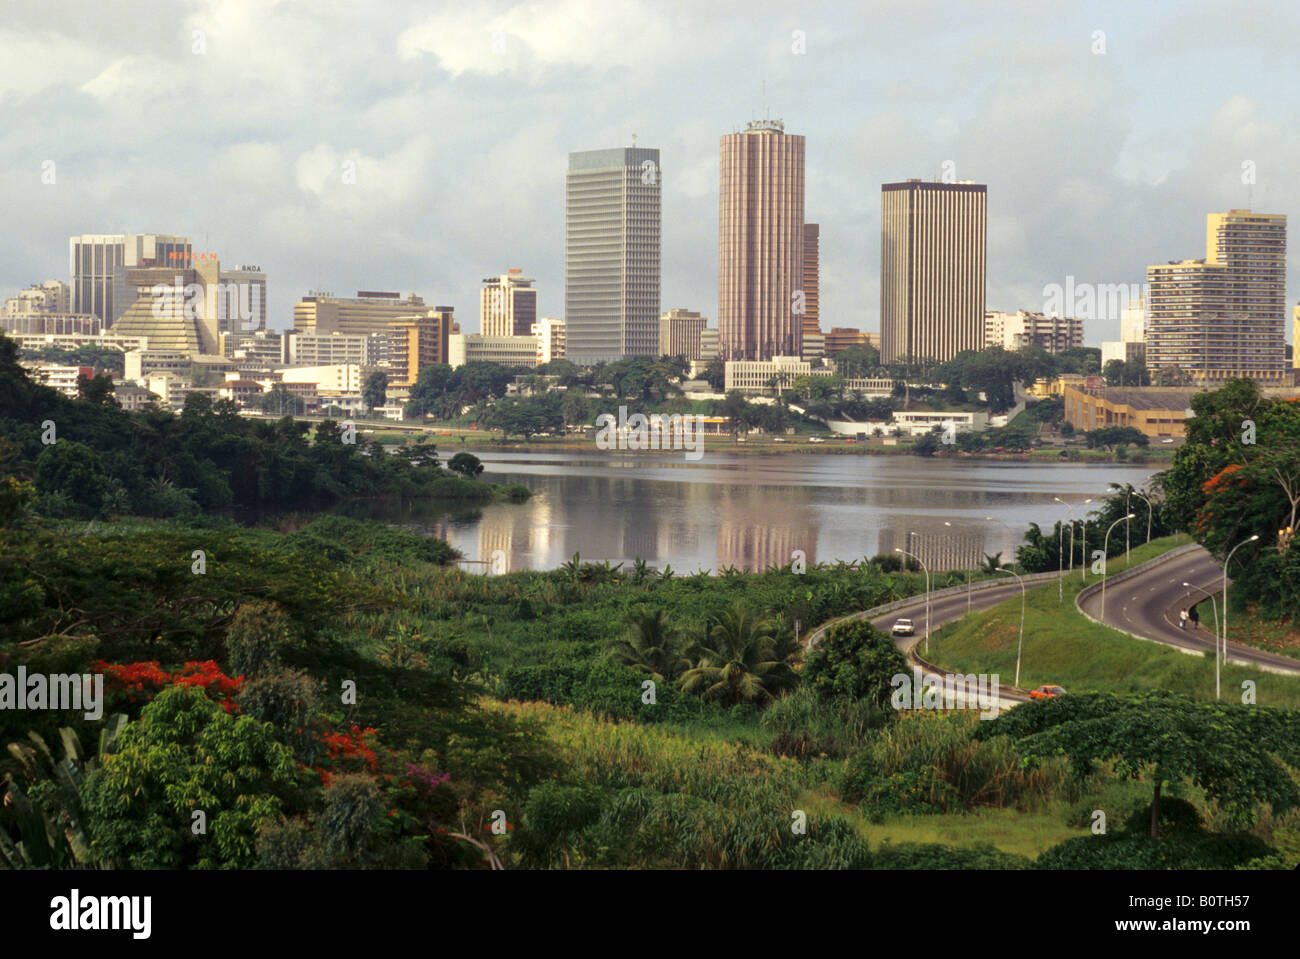 dart lotus amerikansk dollar Abidjan, Cote d'Ivoire, Ivory Coast, West Africa. Skyline View of Plateau  Commercial Area across Lagoon from Cocody Stock Photo - Alamy